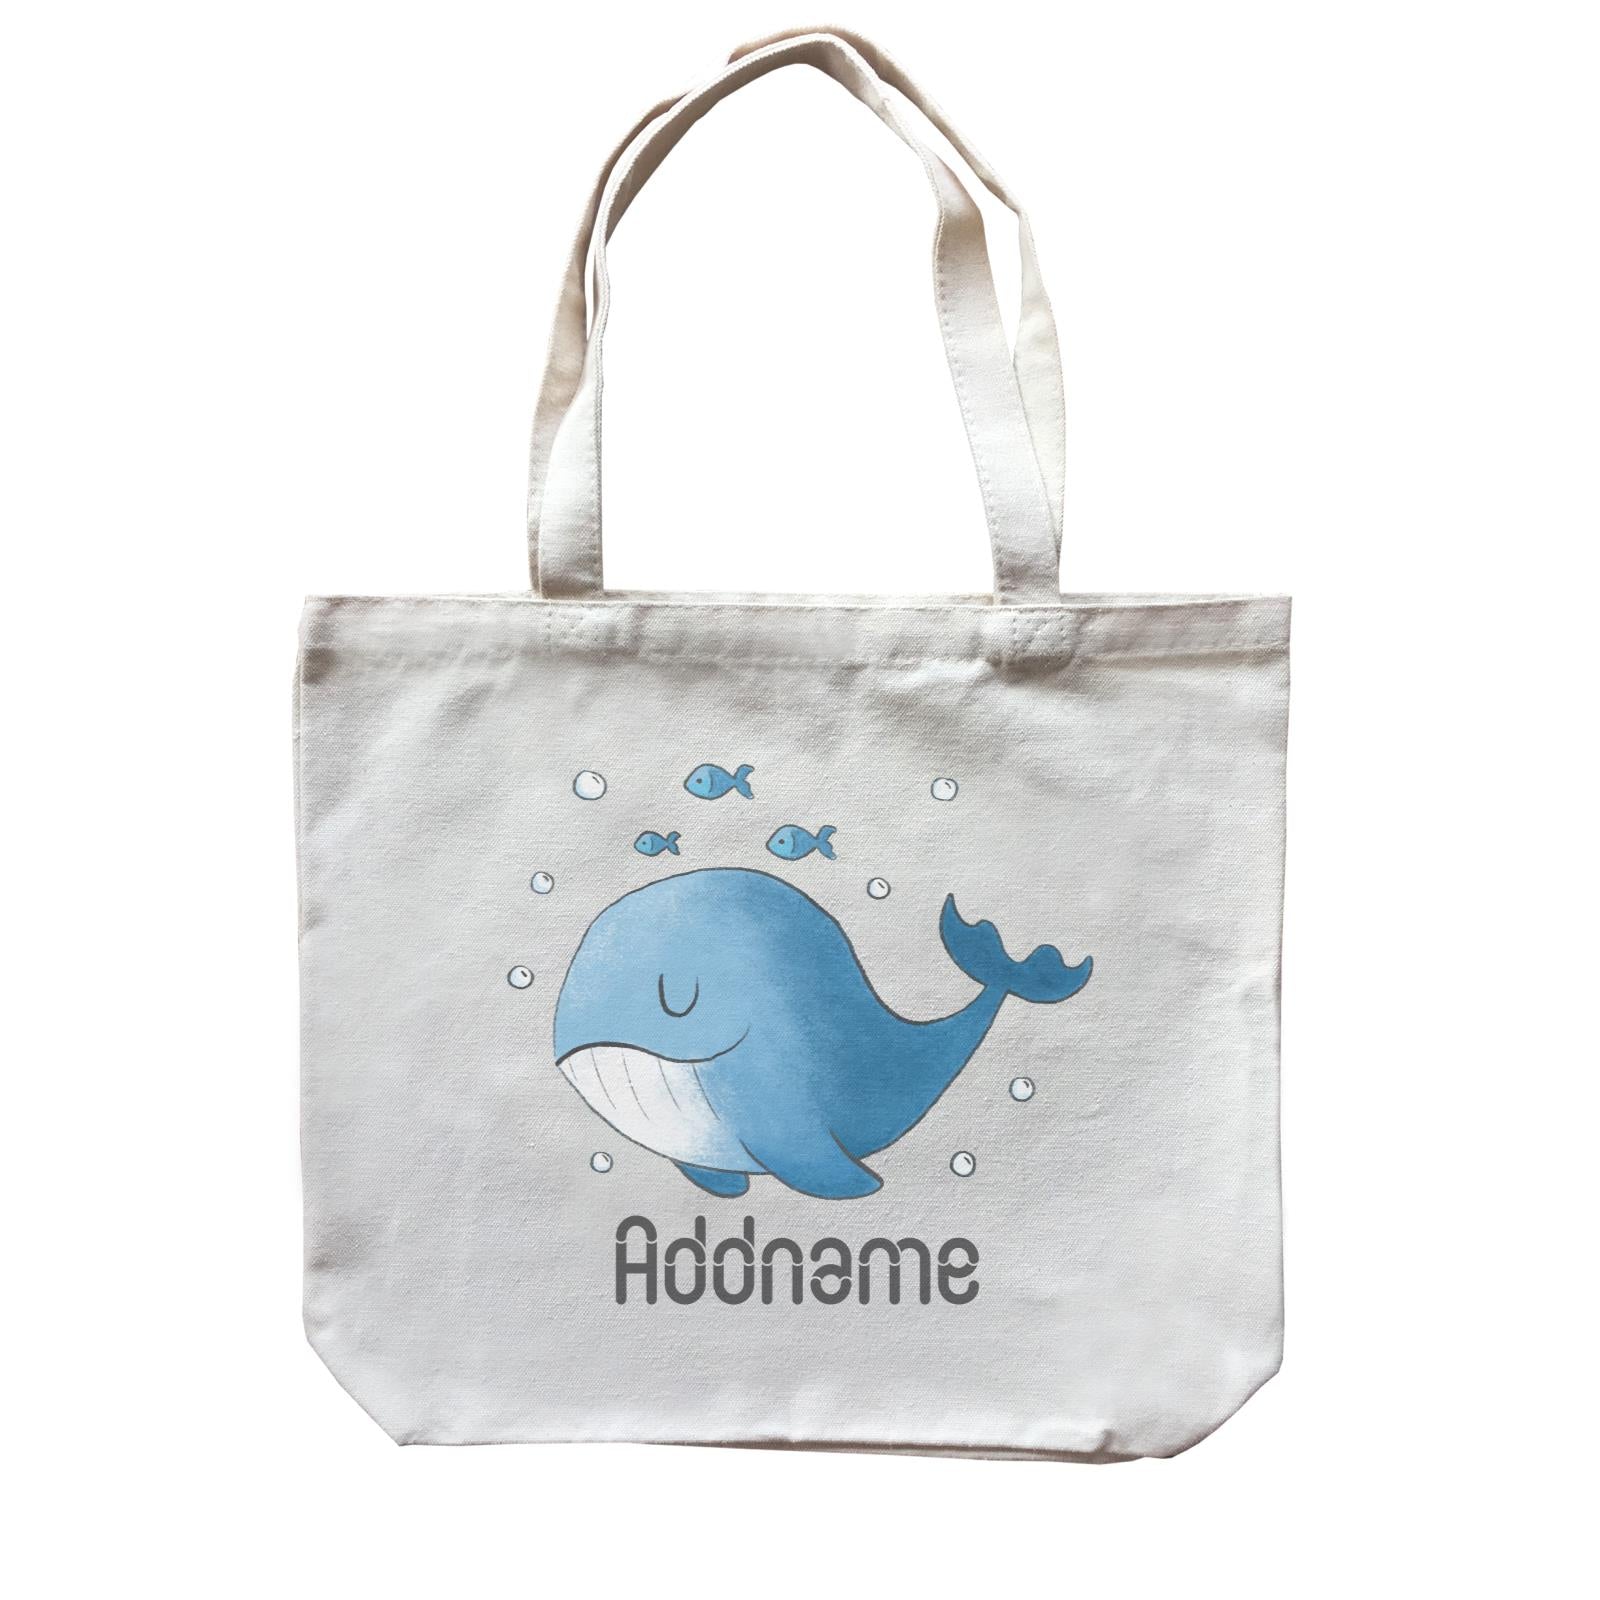 Cute Hand Drawn Style Whale Addname Canvas Bag